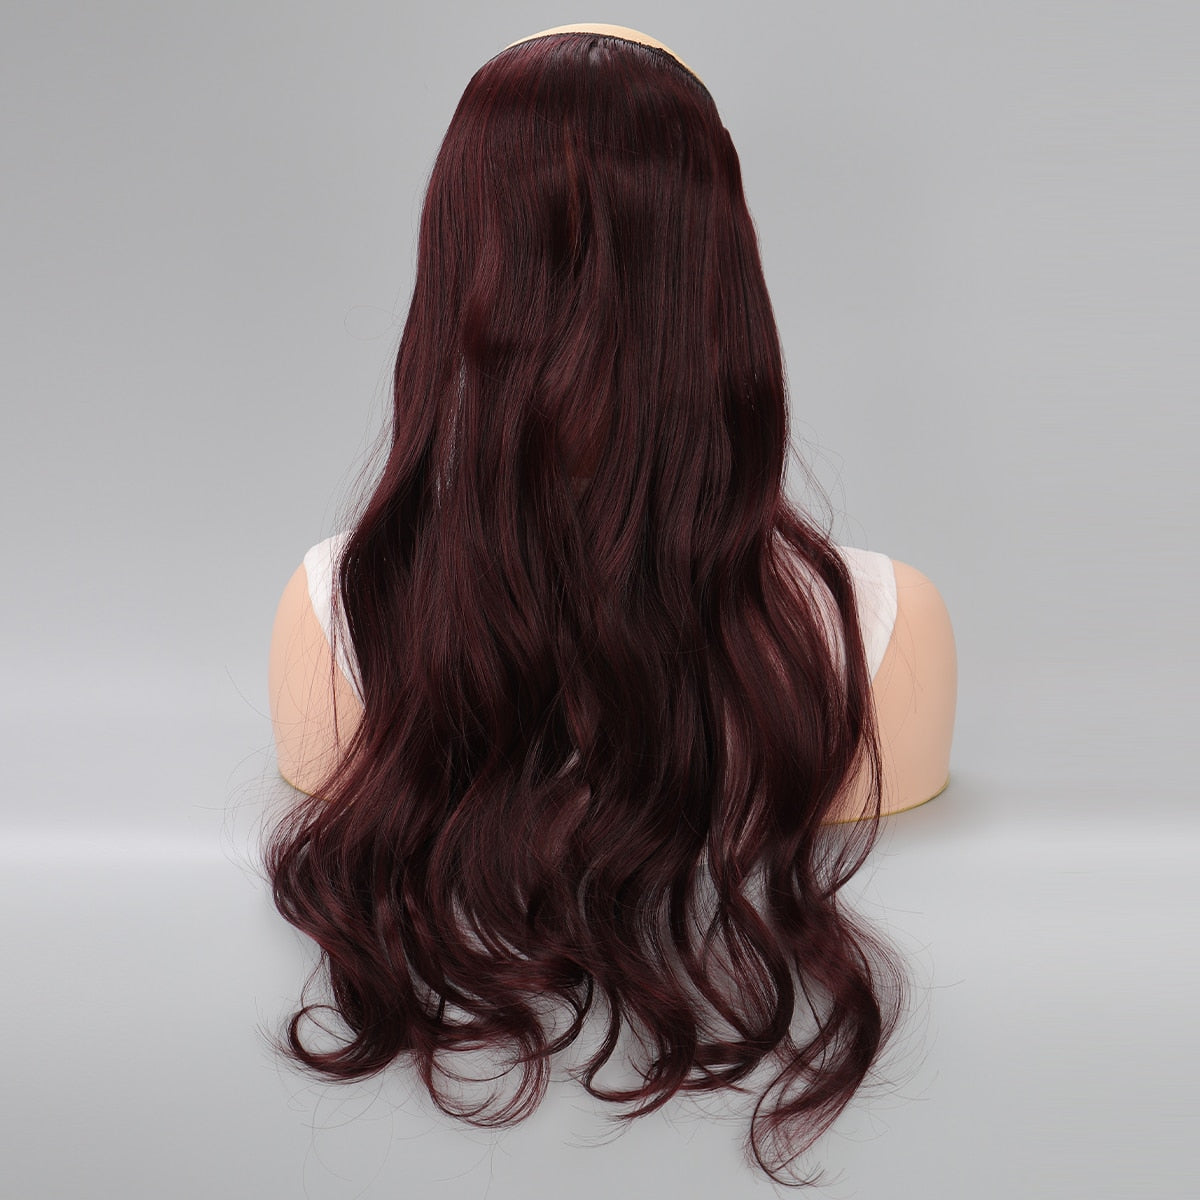 XG Synthetic 24 Inches No Clips In Natural Hidden Secret False Hair Piece Hair Extension Long Curly Fish Line Hair Pieces